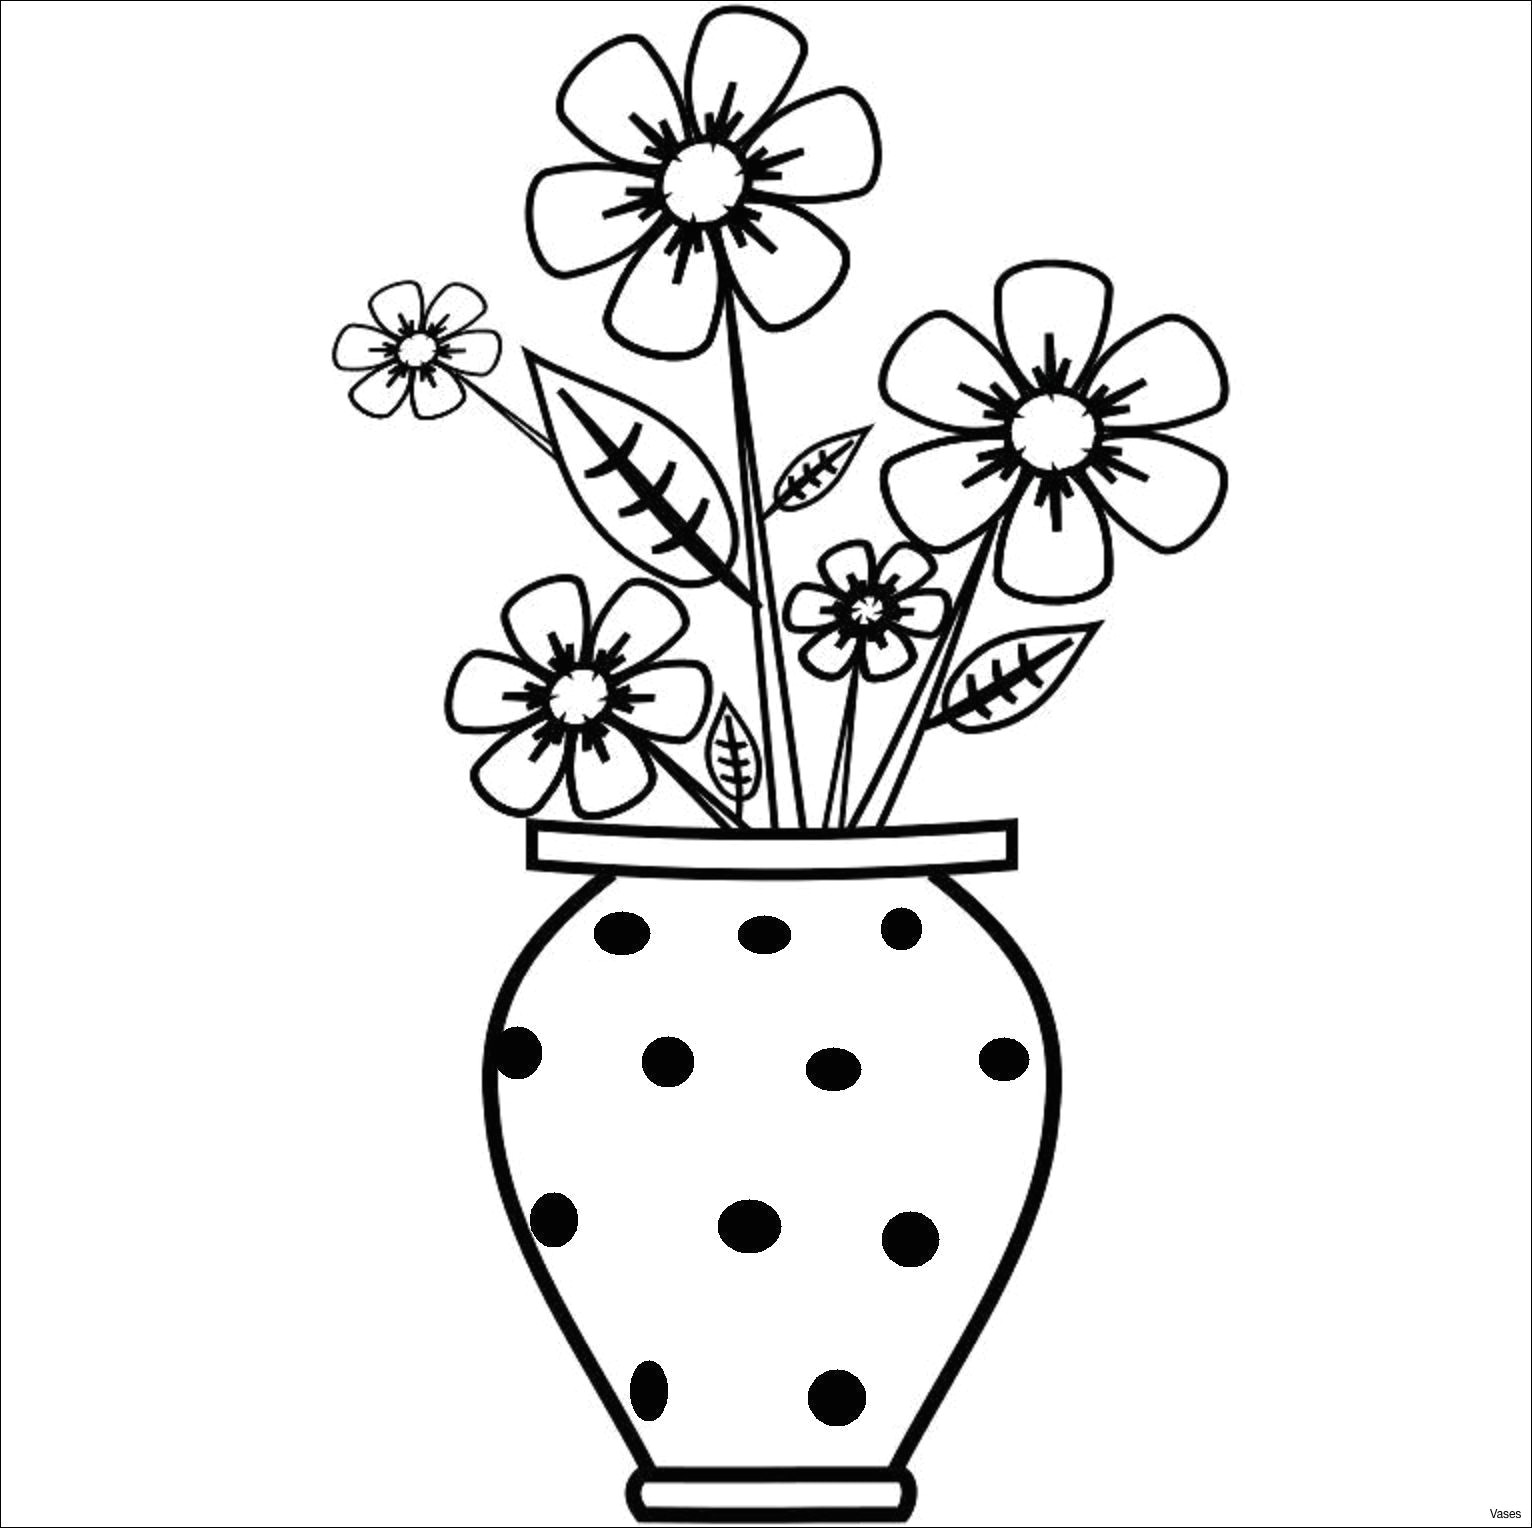 Drawing Of Flower Pot Step by Step Pics Of Drawings Easy Vase Art Drawings How to Draw A Vase Step 2h